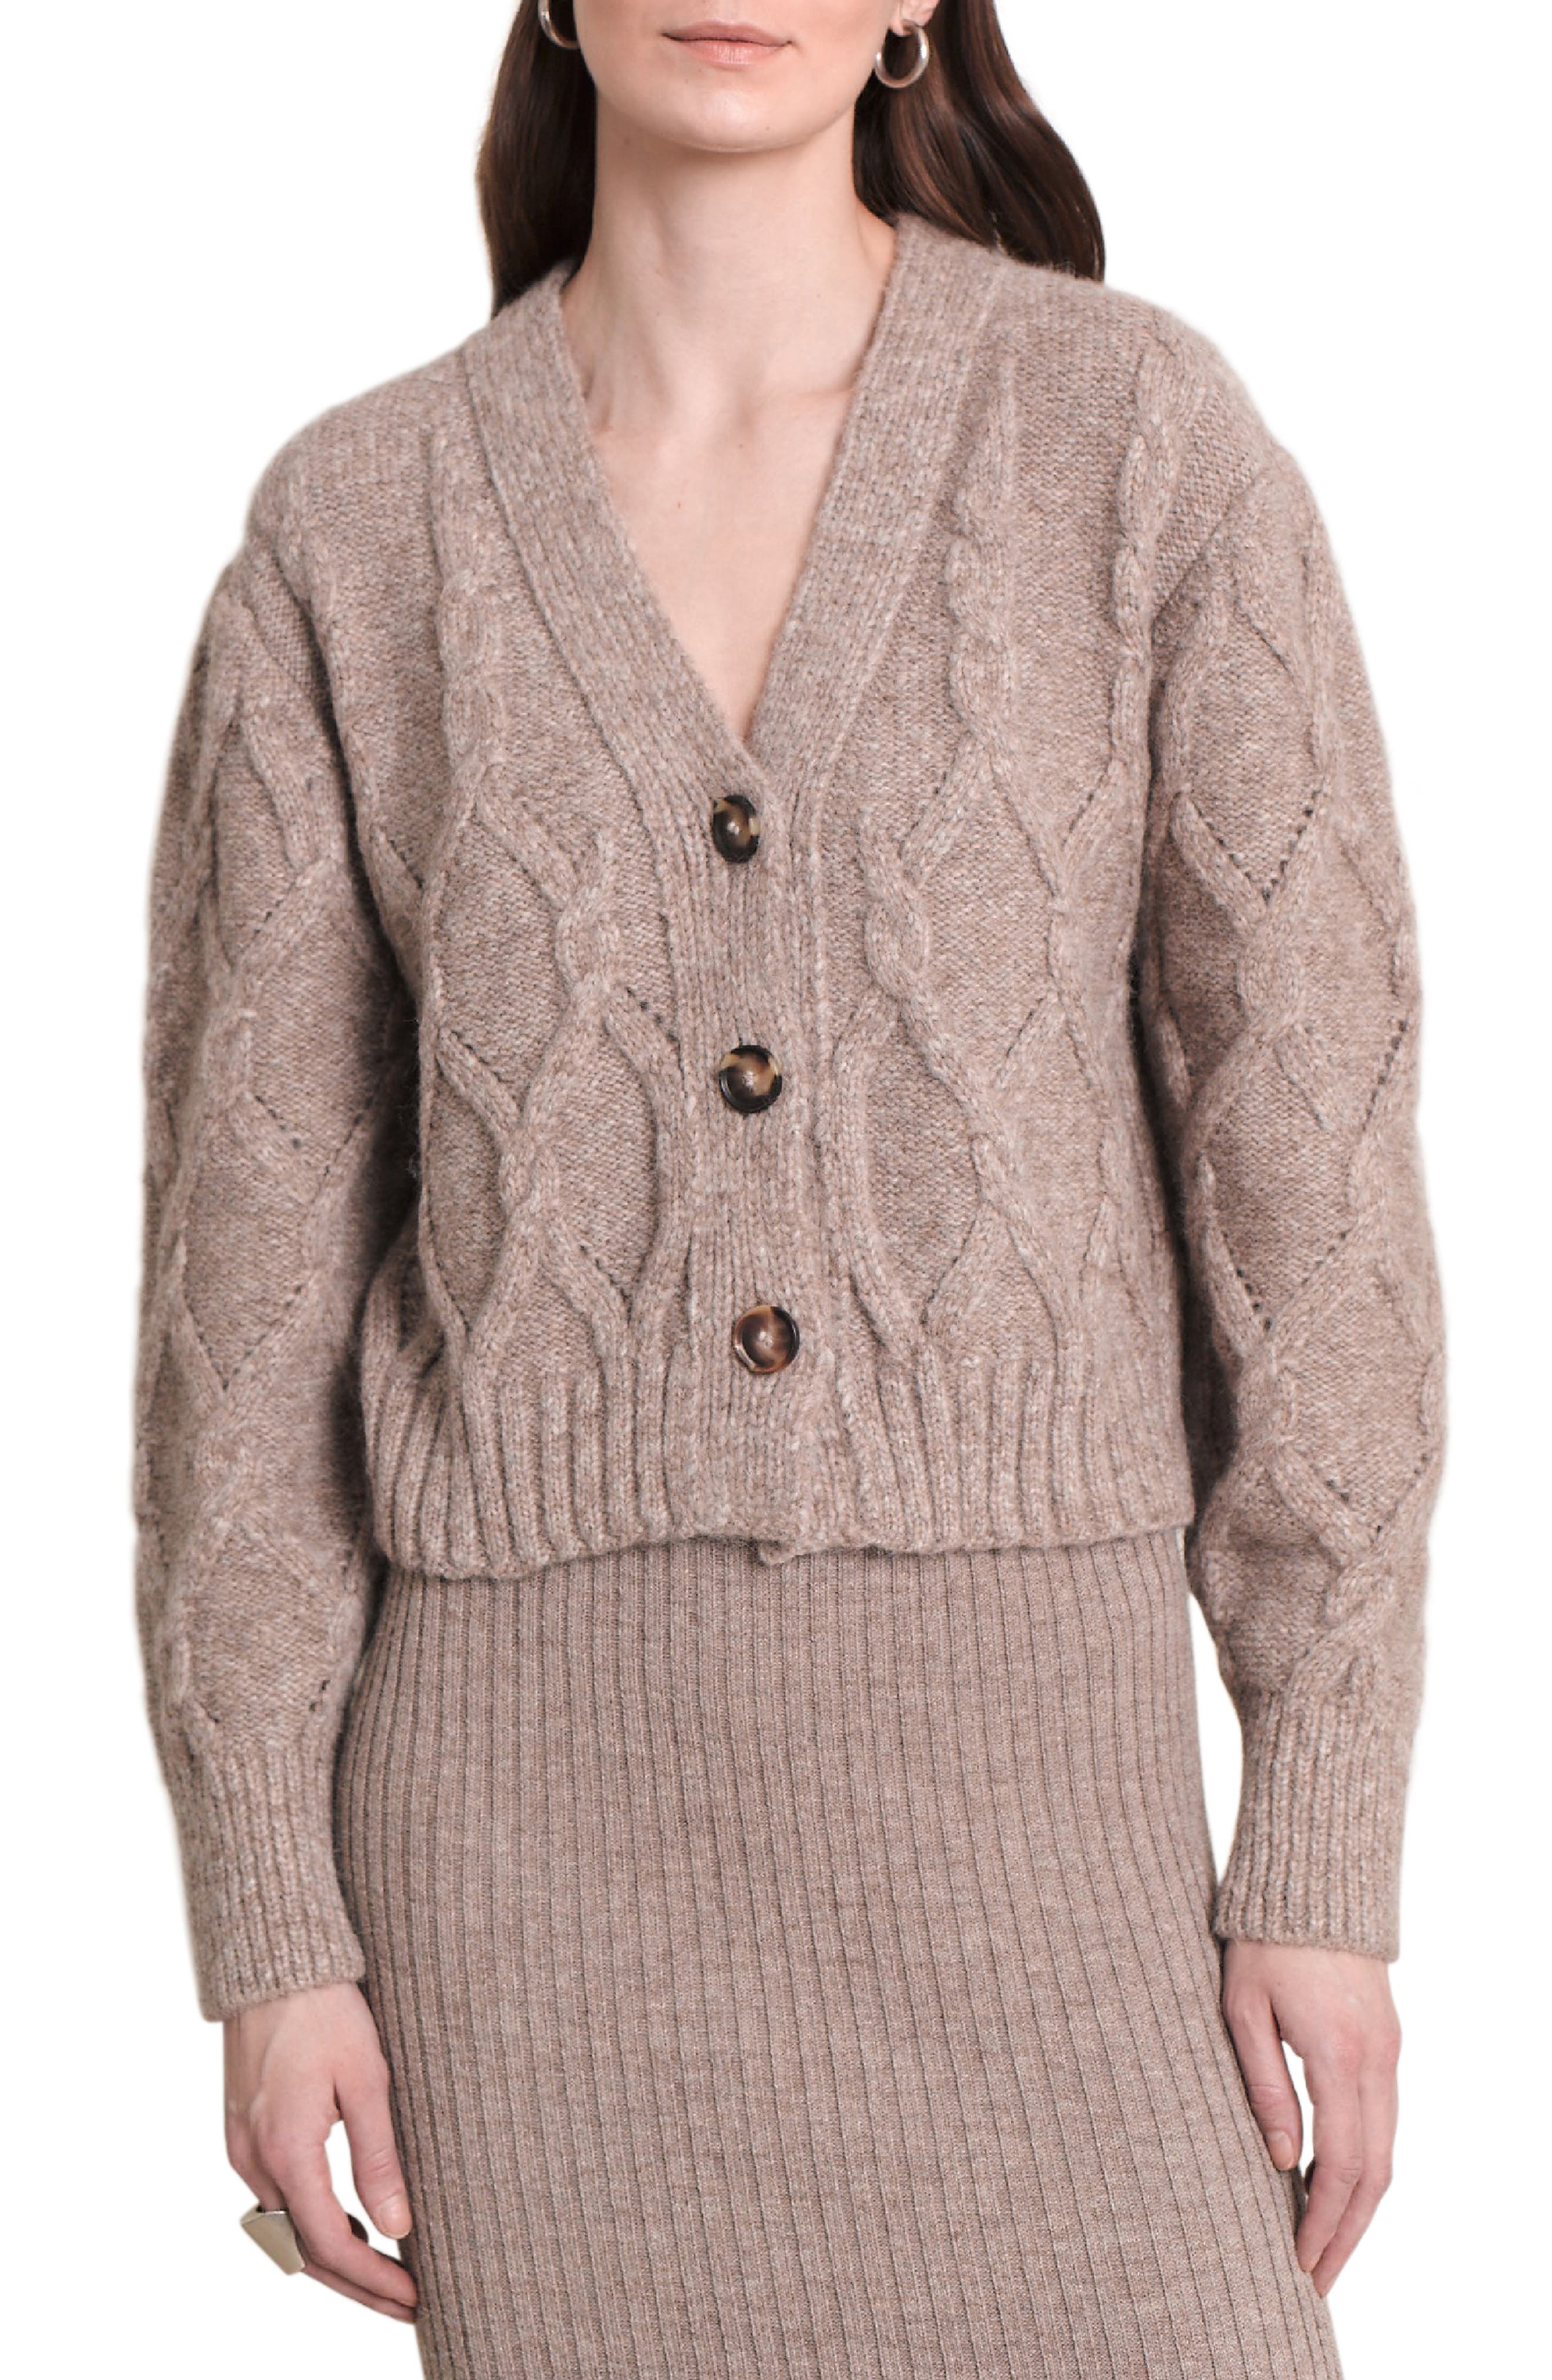 Eleven Six Jeanette Alpaca Blend Cardigan in Biscuit at Nordstrom